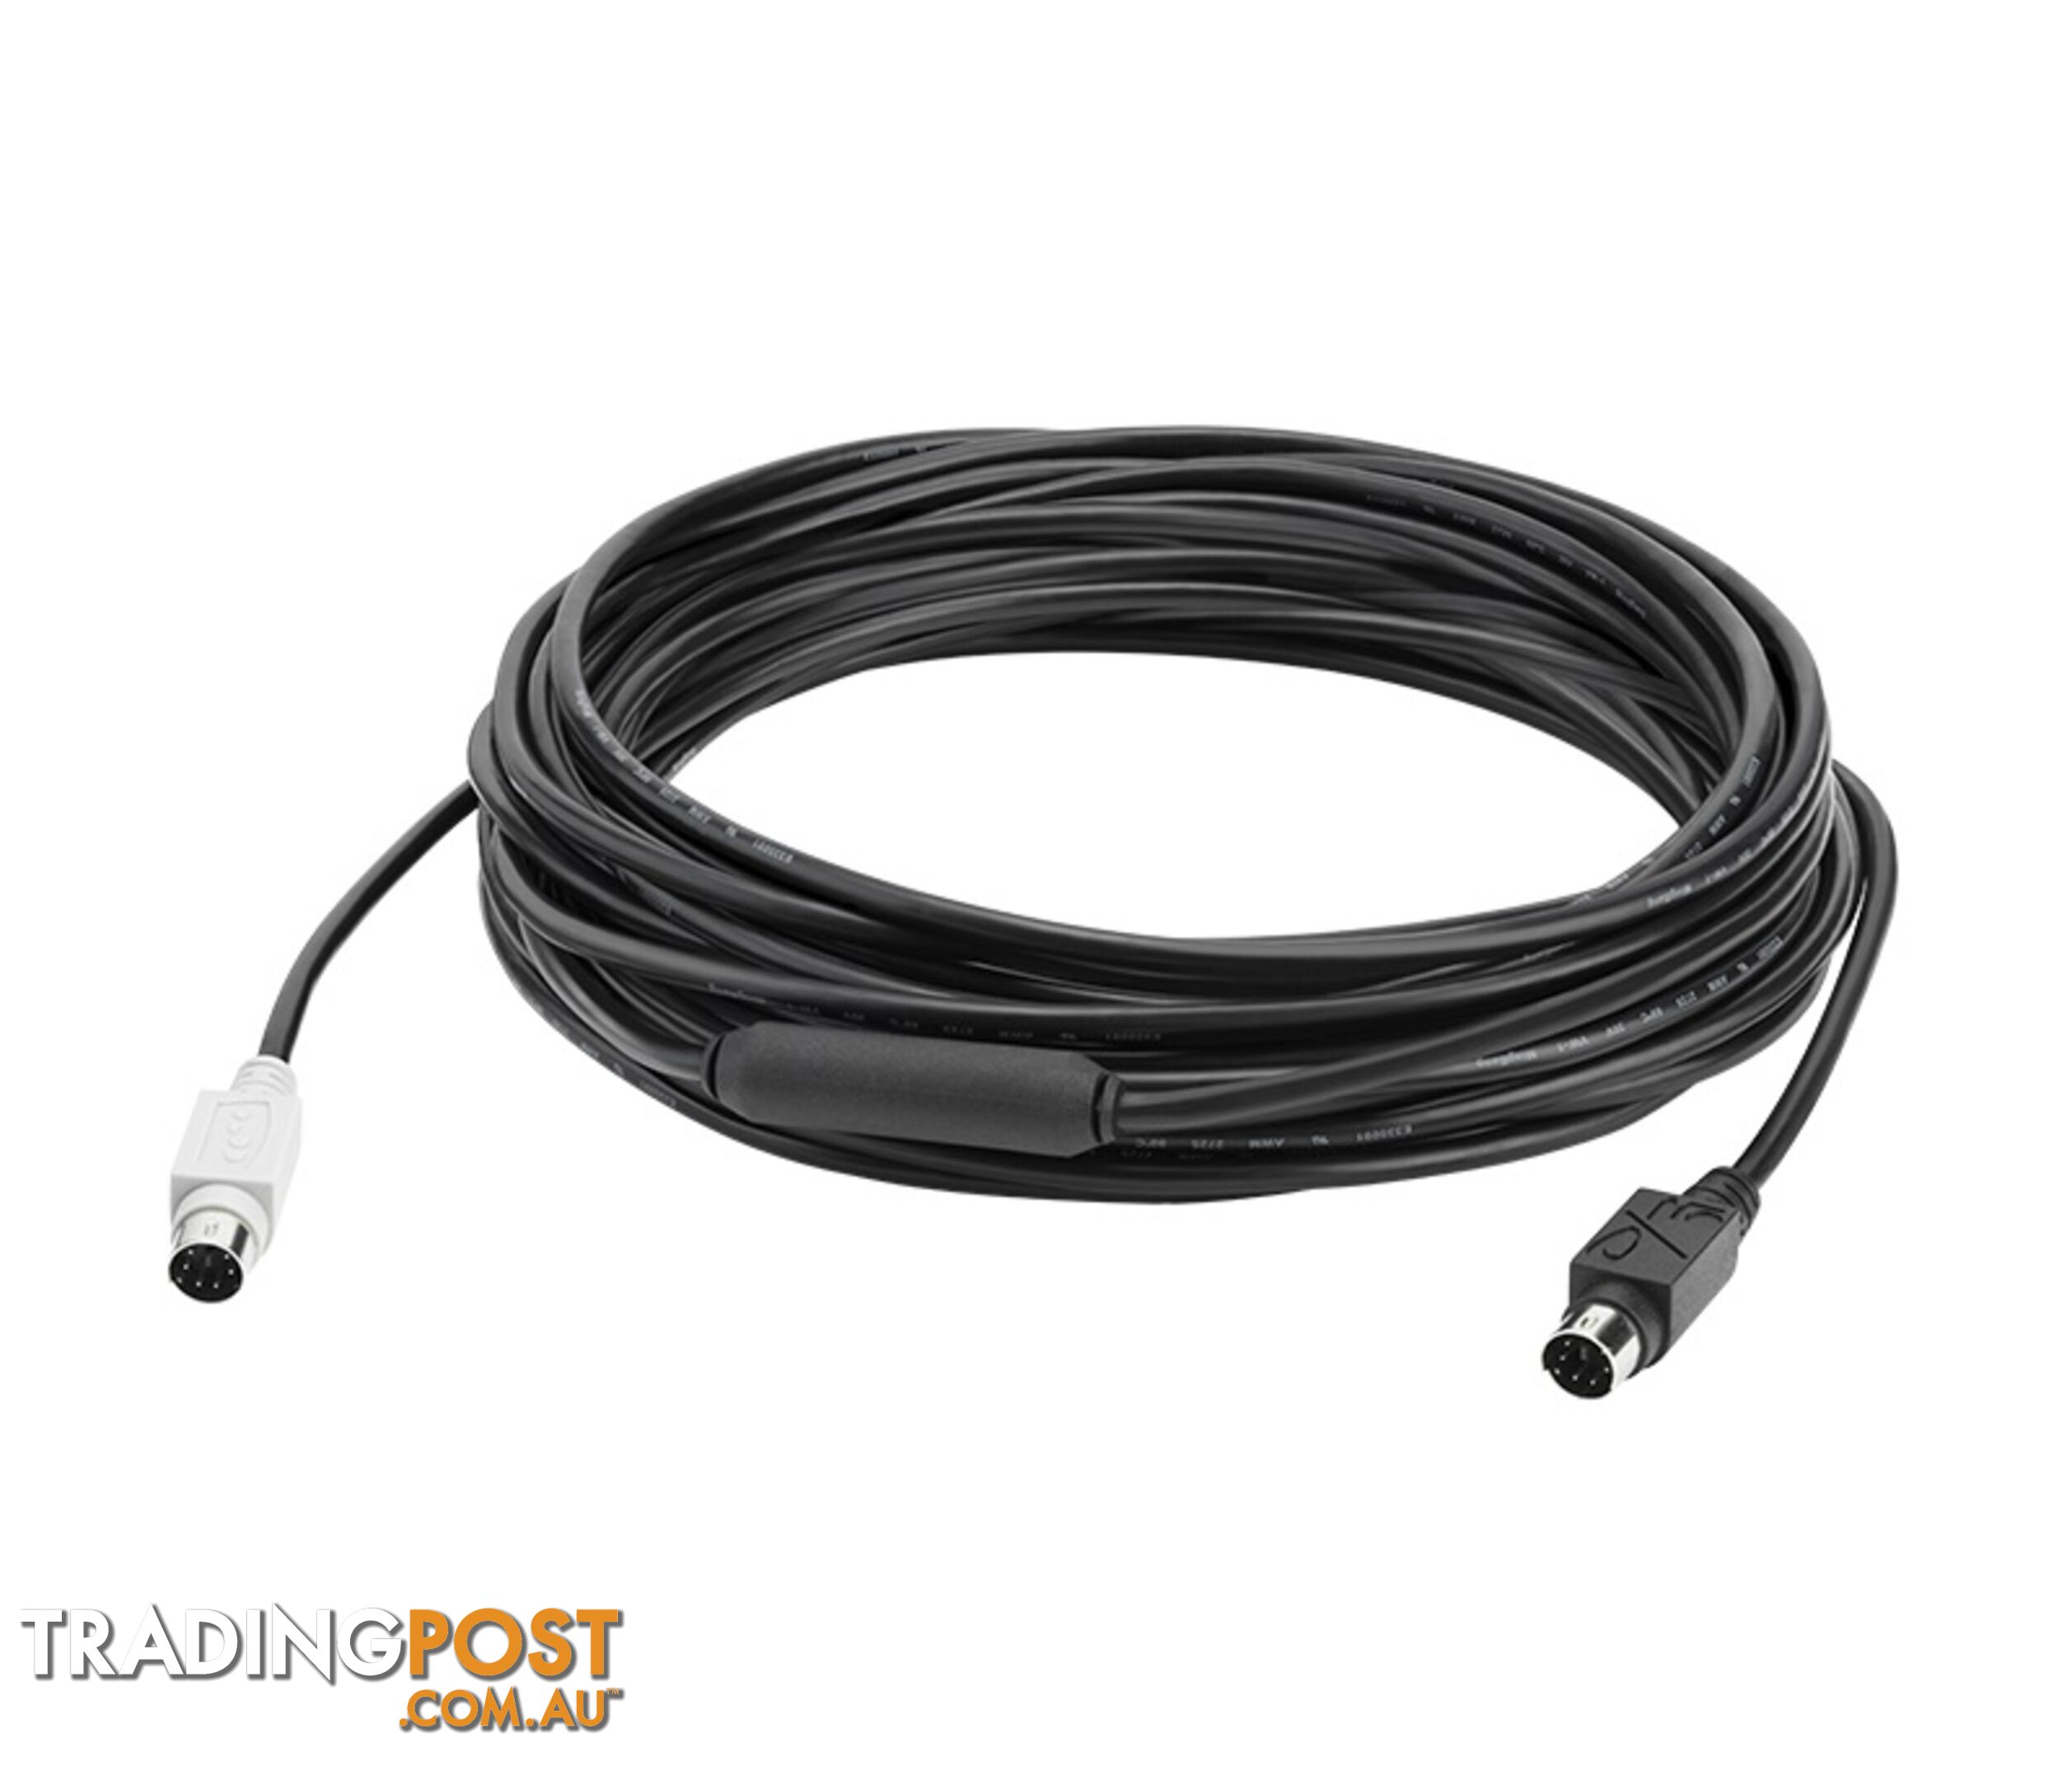 Logitech GROUP 10m Extender Cable Mini-DIN-6 Connection to increase the distance from the hub to the camera or speakerphone for Large Conference Room - VILT-GROUP10M